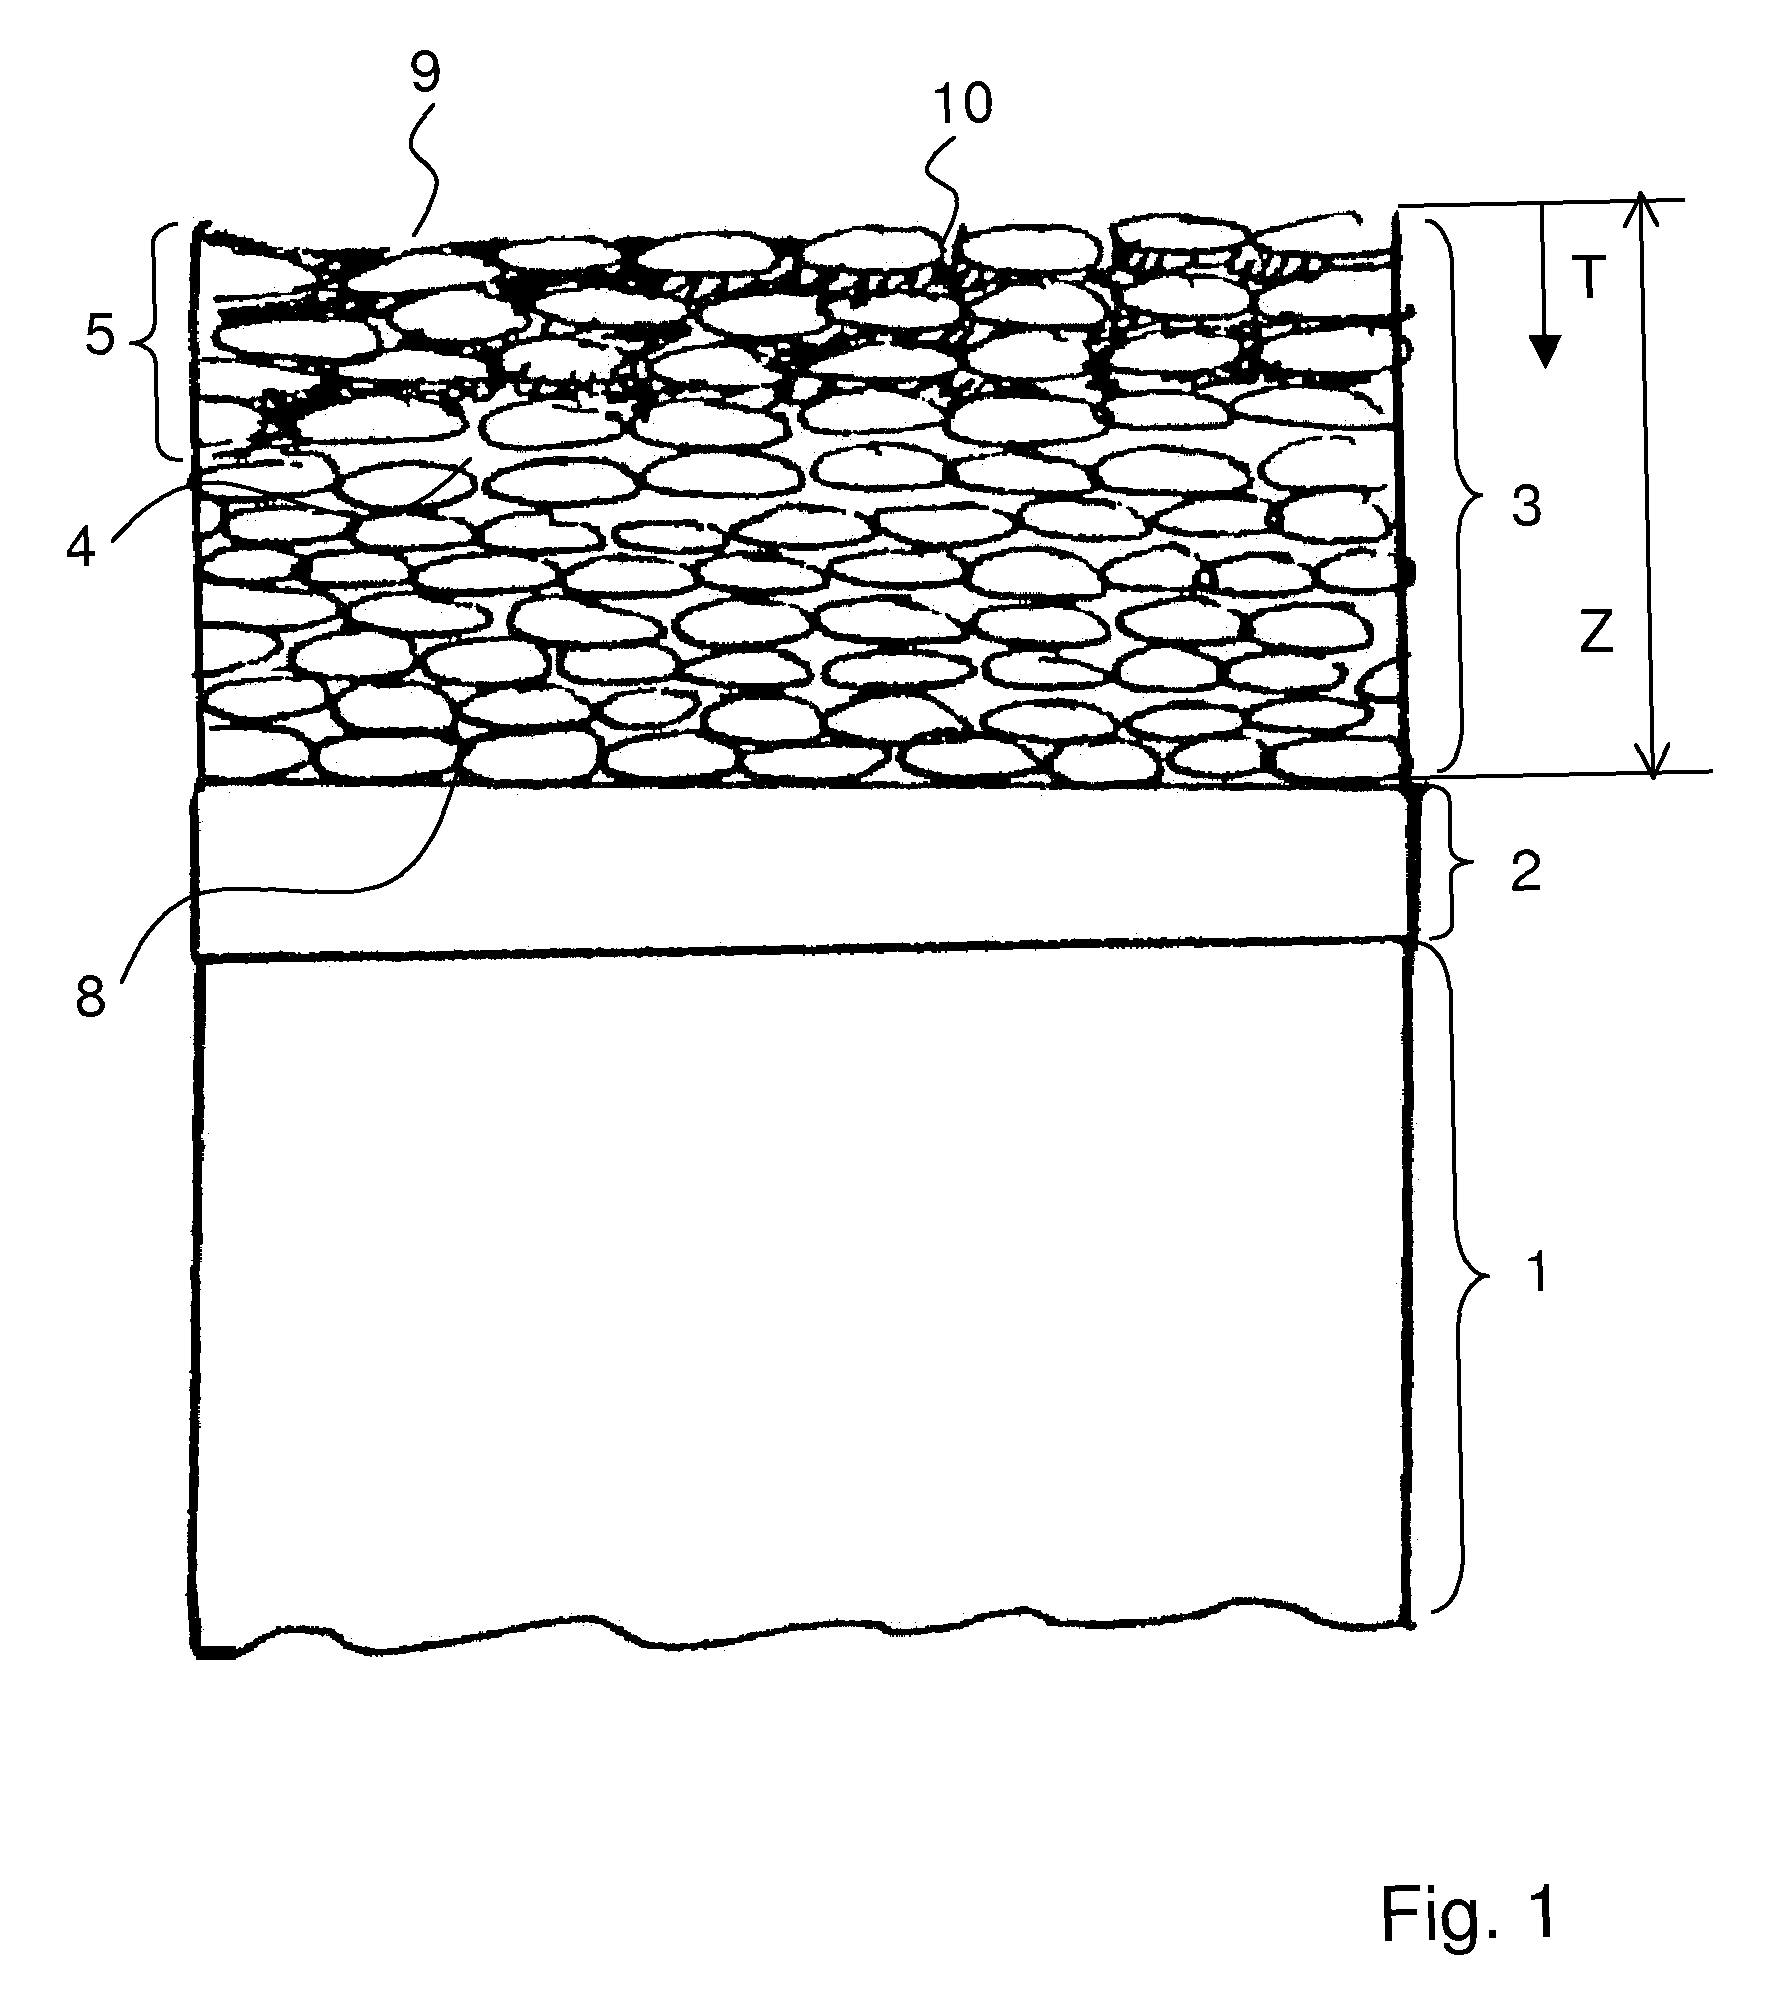 Methods for the protection of a thermal barrier coating system and methods for the renewal of such a protection